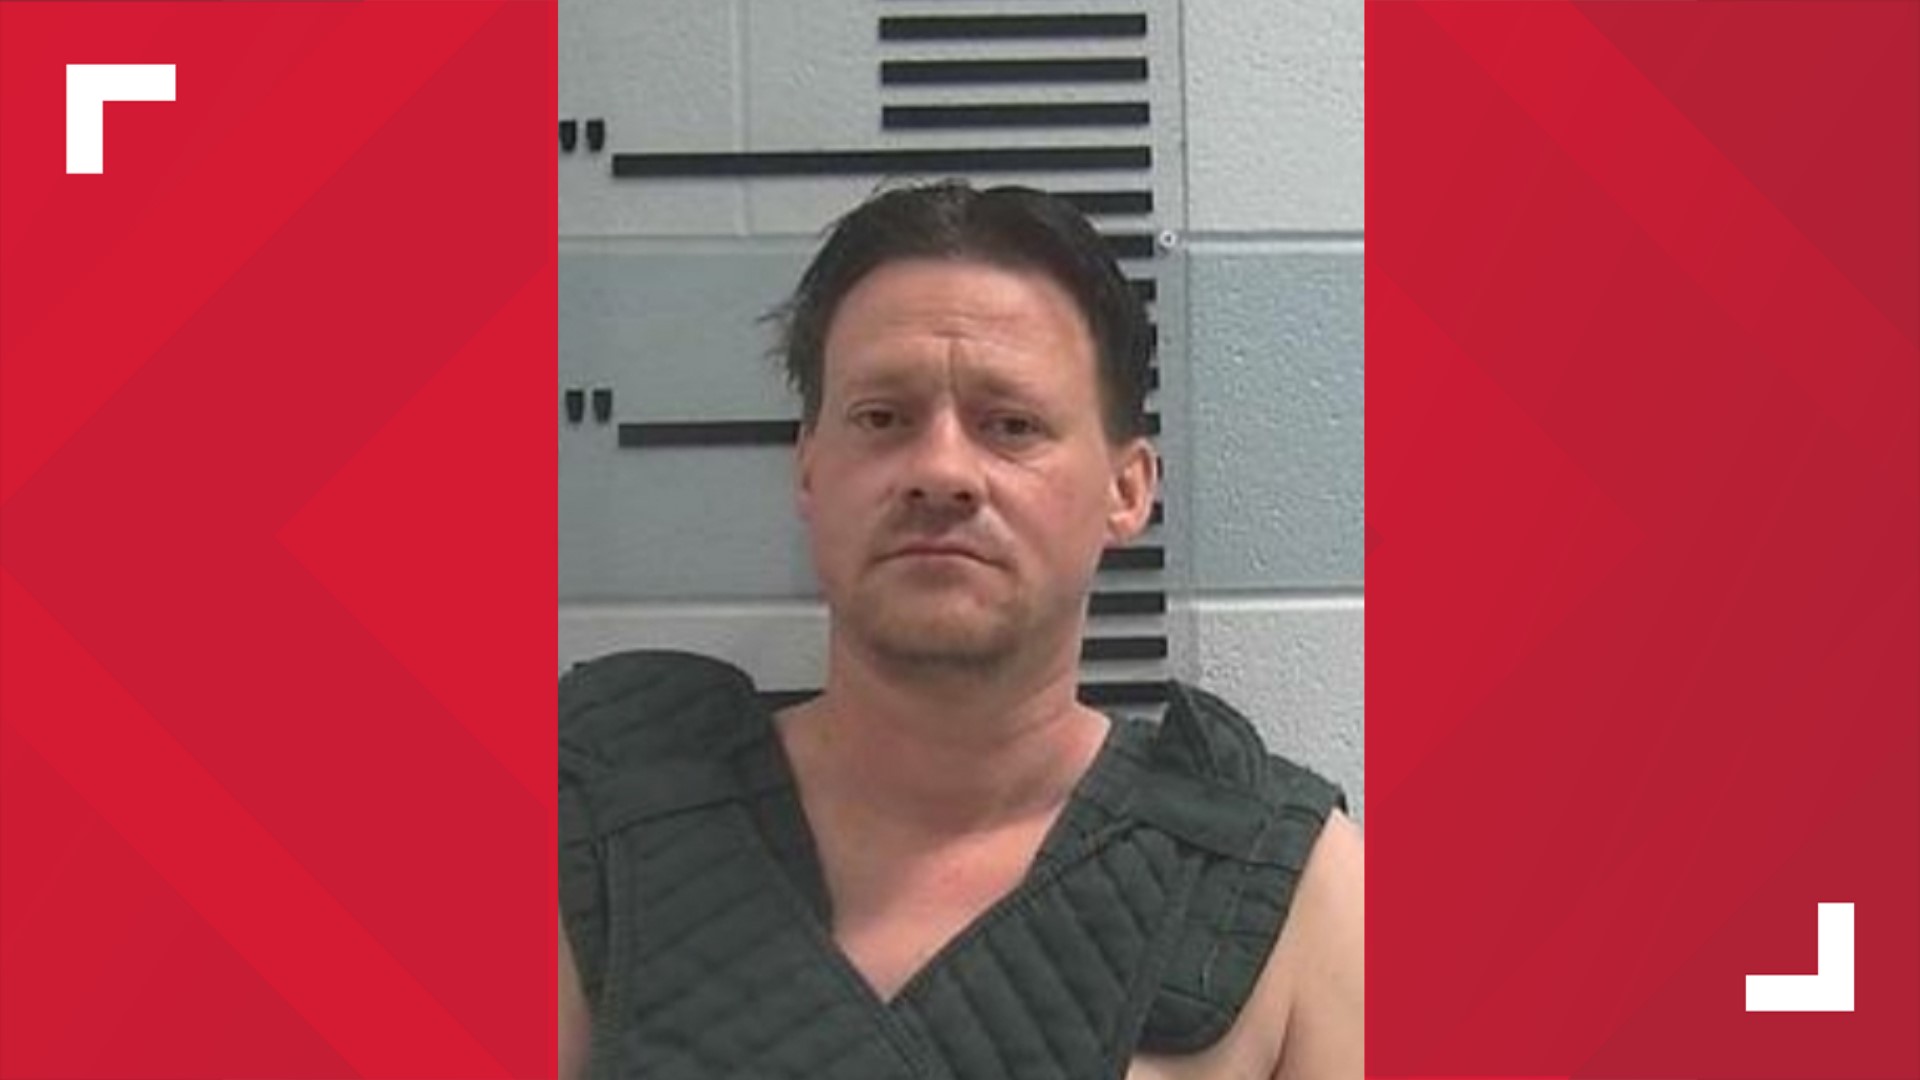 An investigation by detectives revealed that the man was involved in a dispute with his brother, 39-year-old Mickey Enmen.